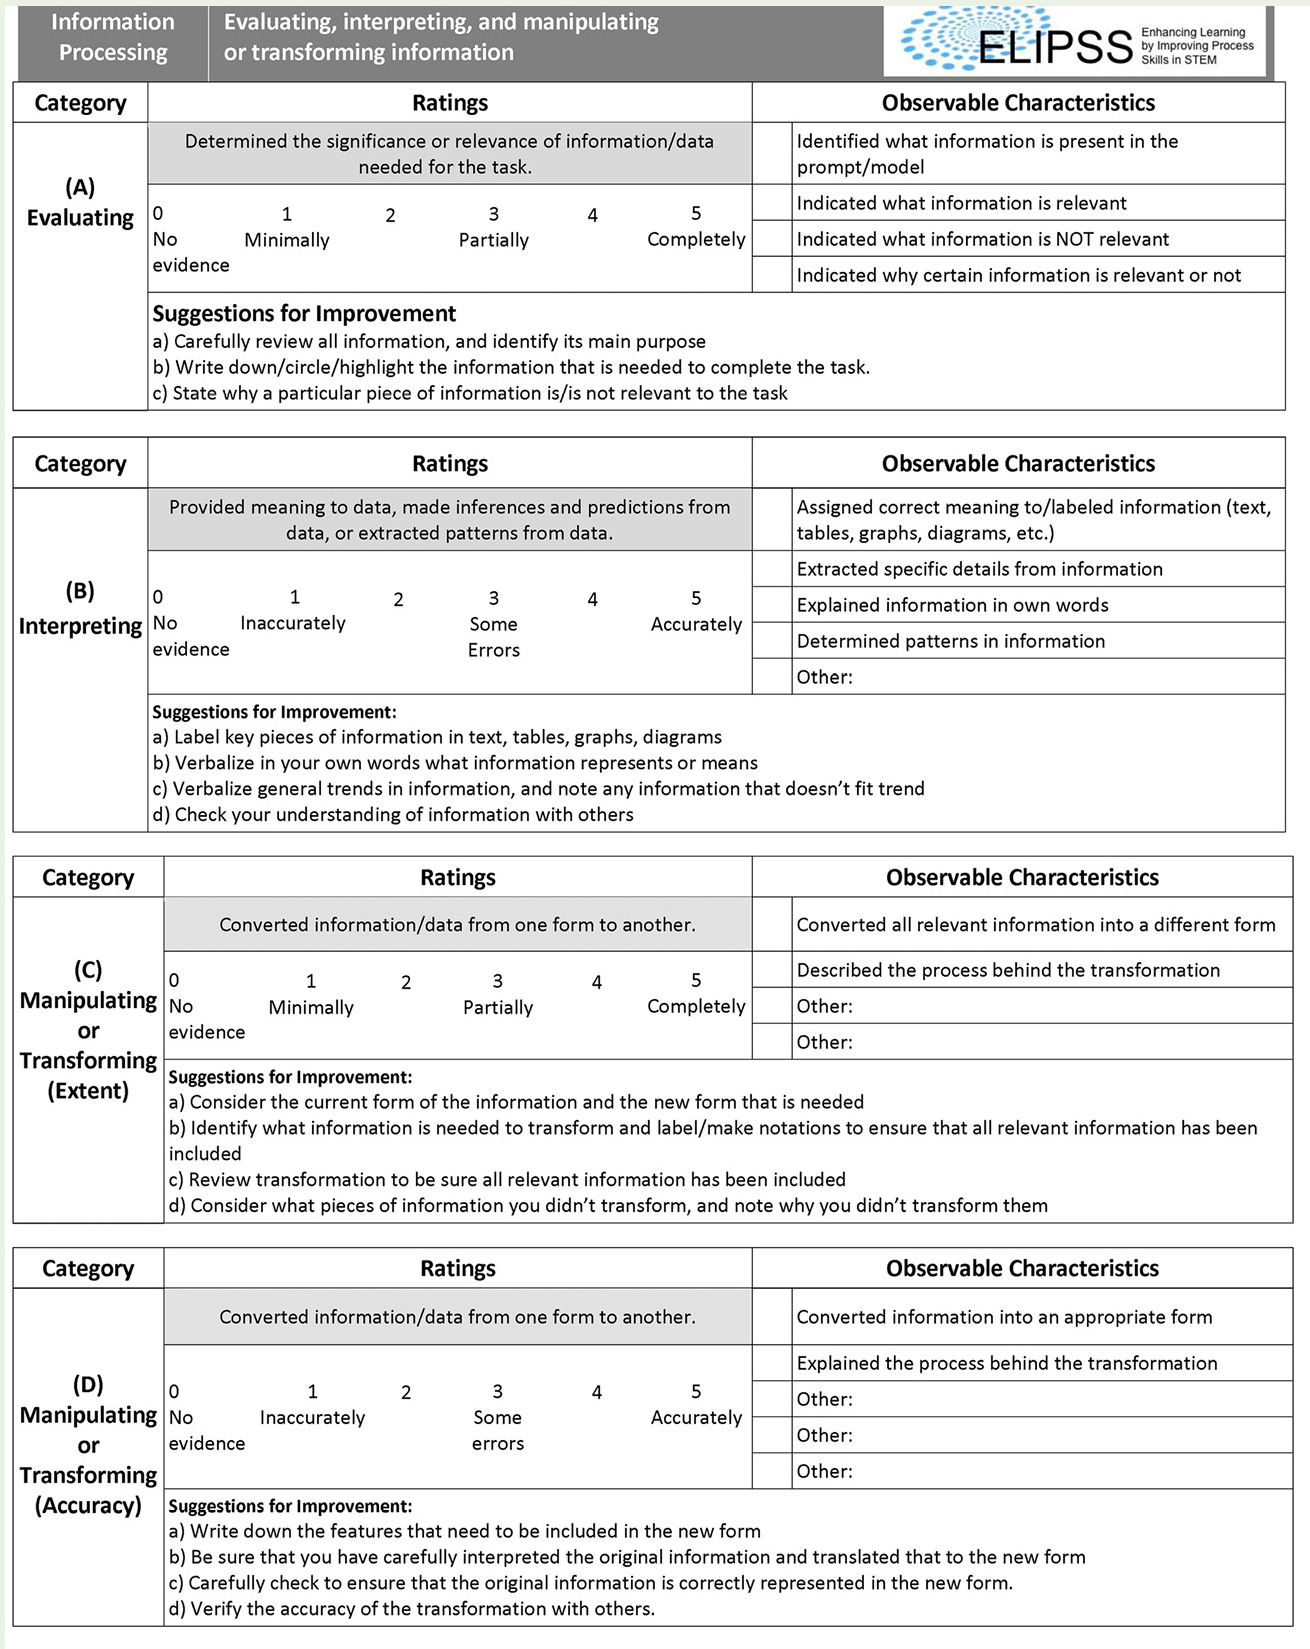 Feedback-style rubric for information processing. (Used with permission of the ELIPSS project.)